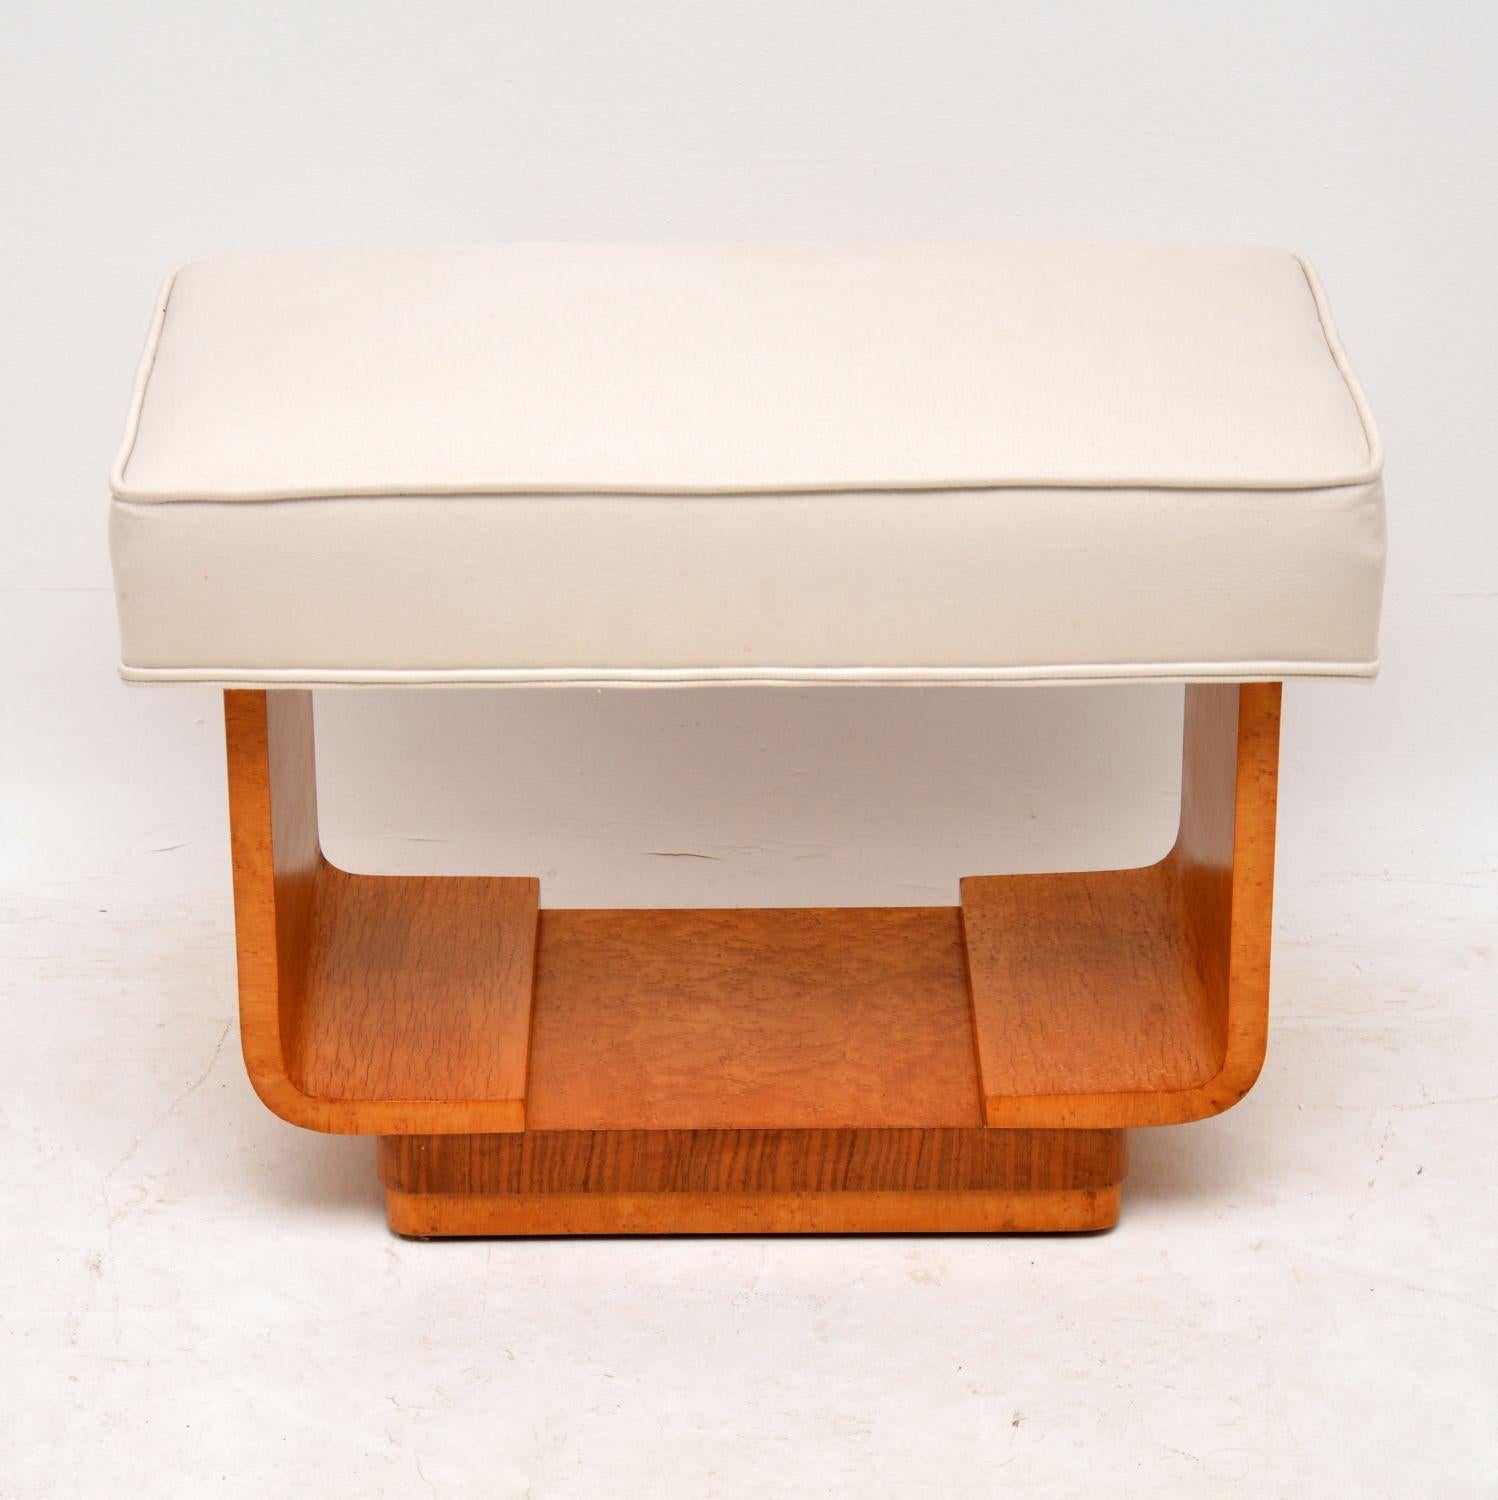 Original and very stylish Art Deco stool, dating from the 1930s period and in excellent original condition. The woods are birds eye maple, walnut and perhaps sycamore. We have just had this stool re-polished to a high standard and re-upholstered in